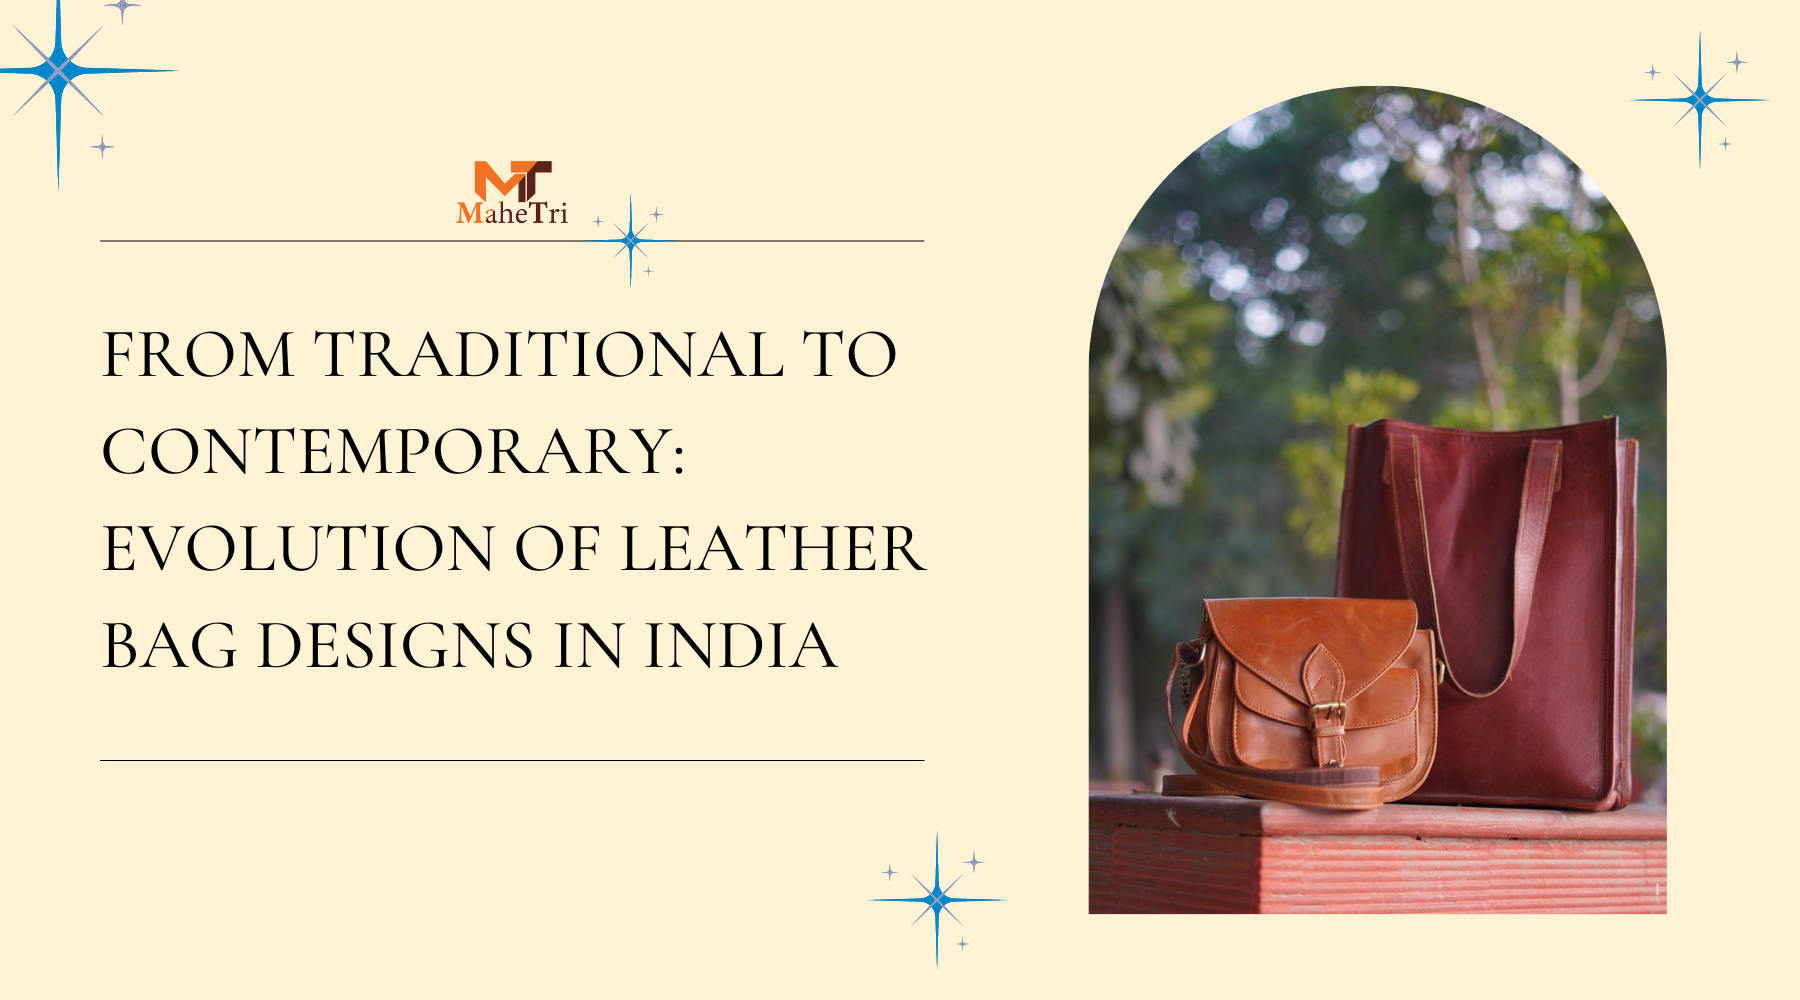 From Traditional to Contemporary: Evolution of Leather Bag Designs in India